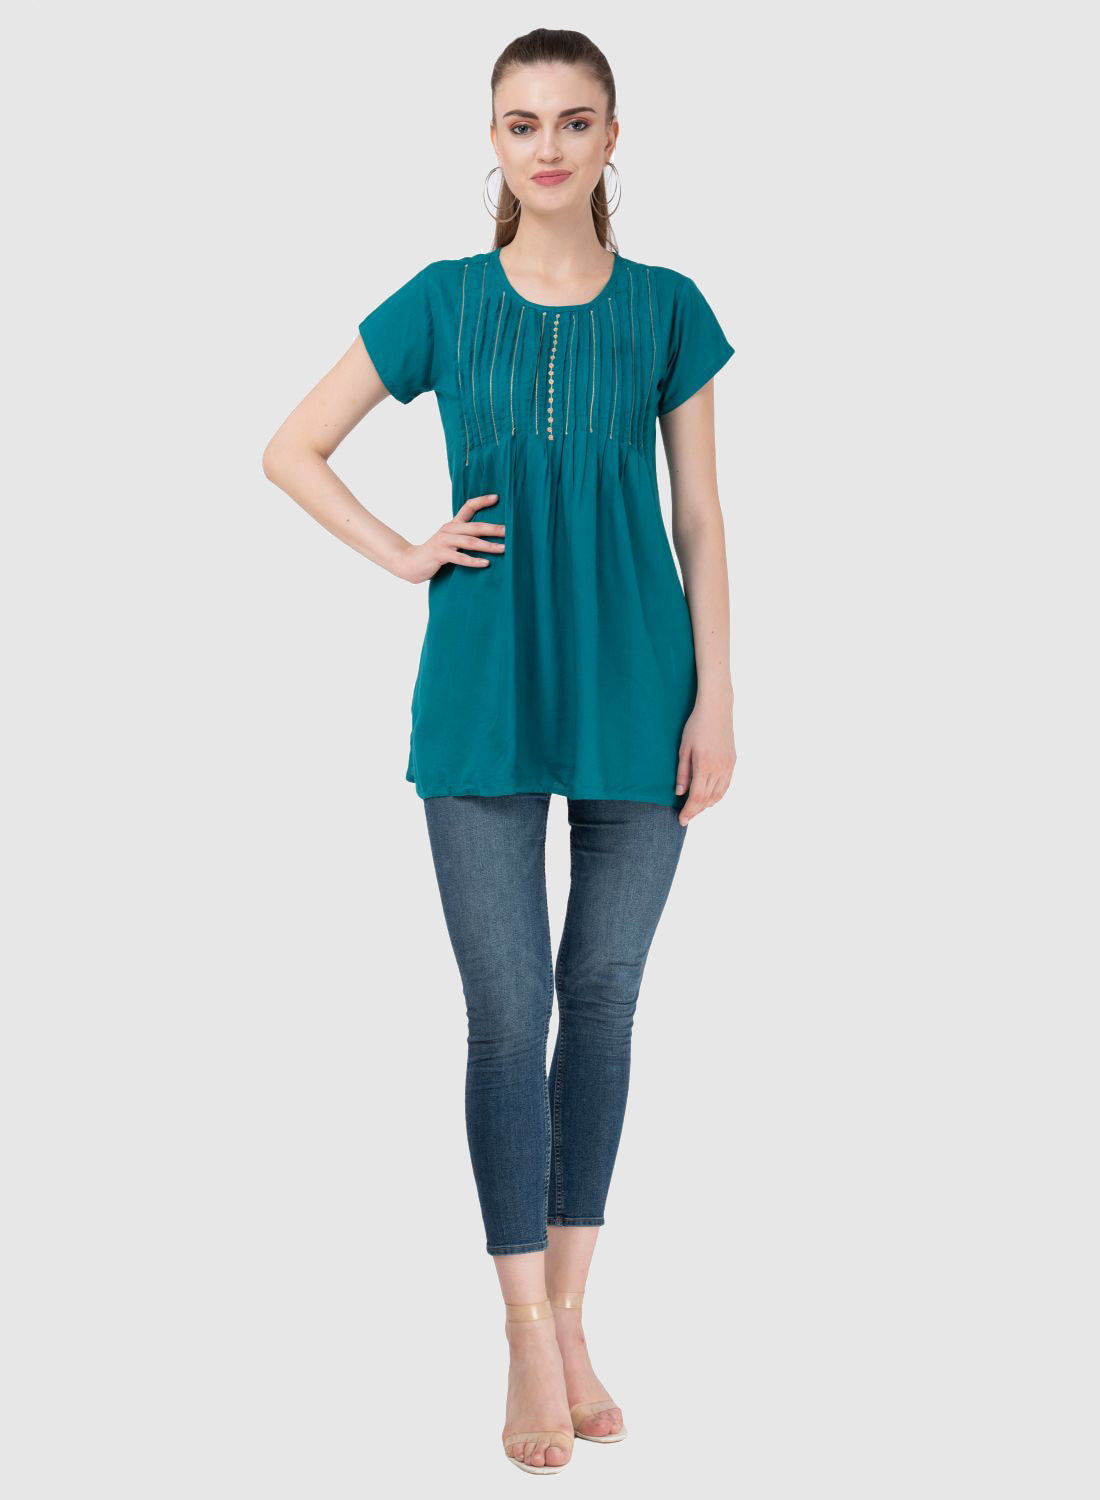 Women Top P Blue Casual Regular Fit and Flare Half Sleeve Embroidery Work